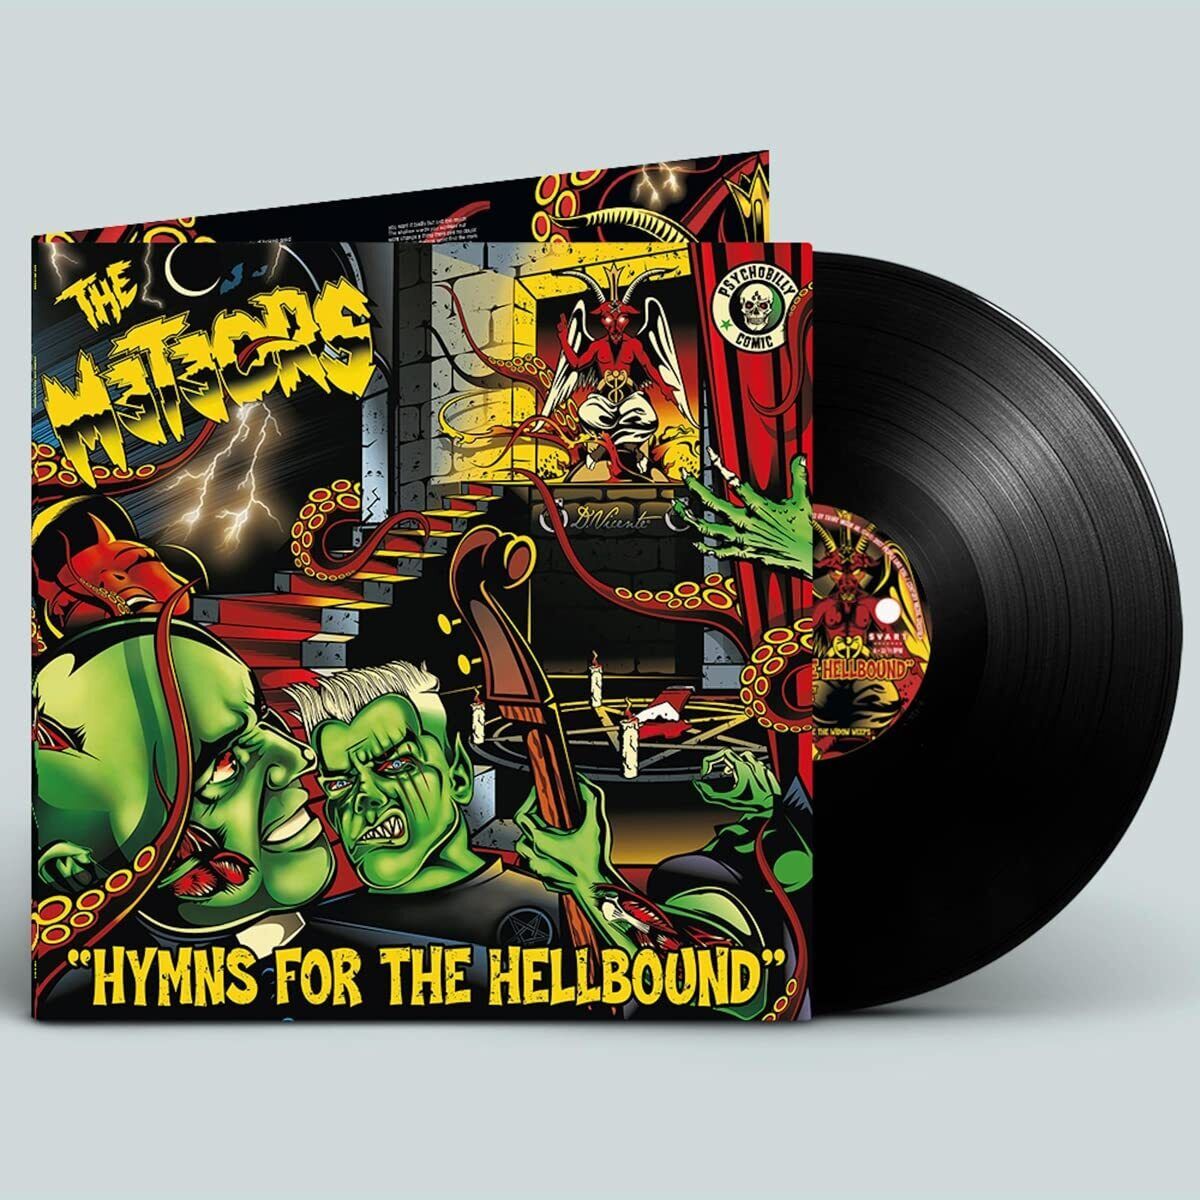 Hymns For The Hellbound [VINYL], The Meteors, lp_record, New, FREE & FAST Delive